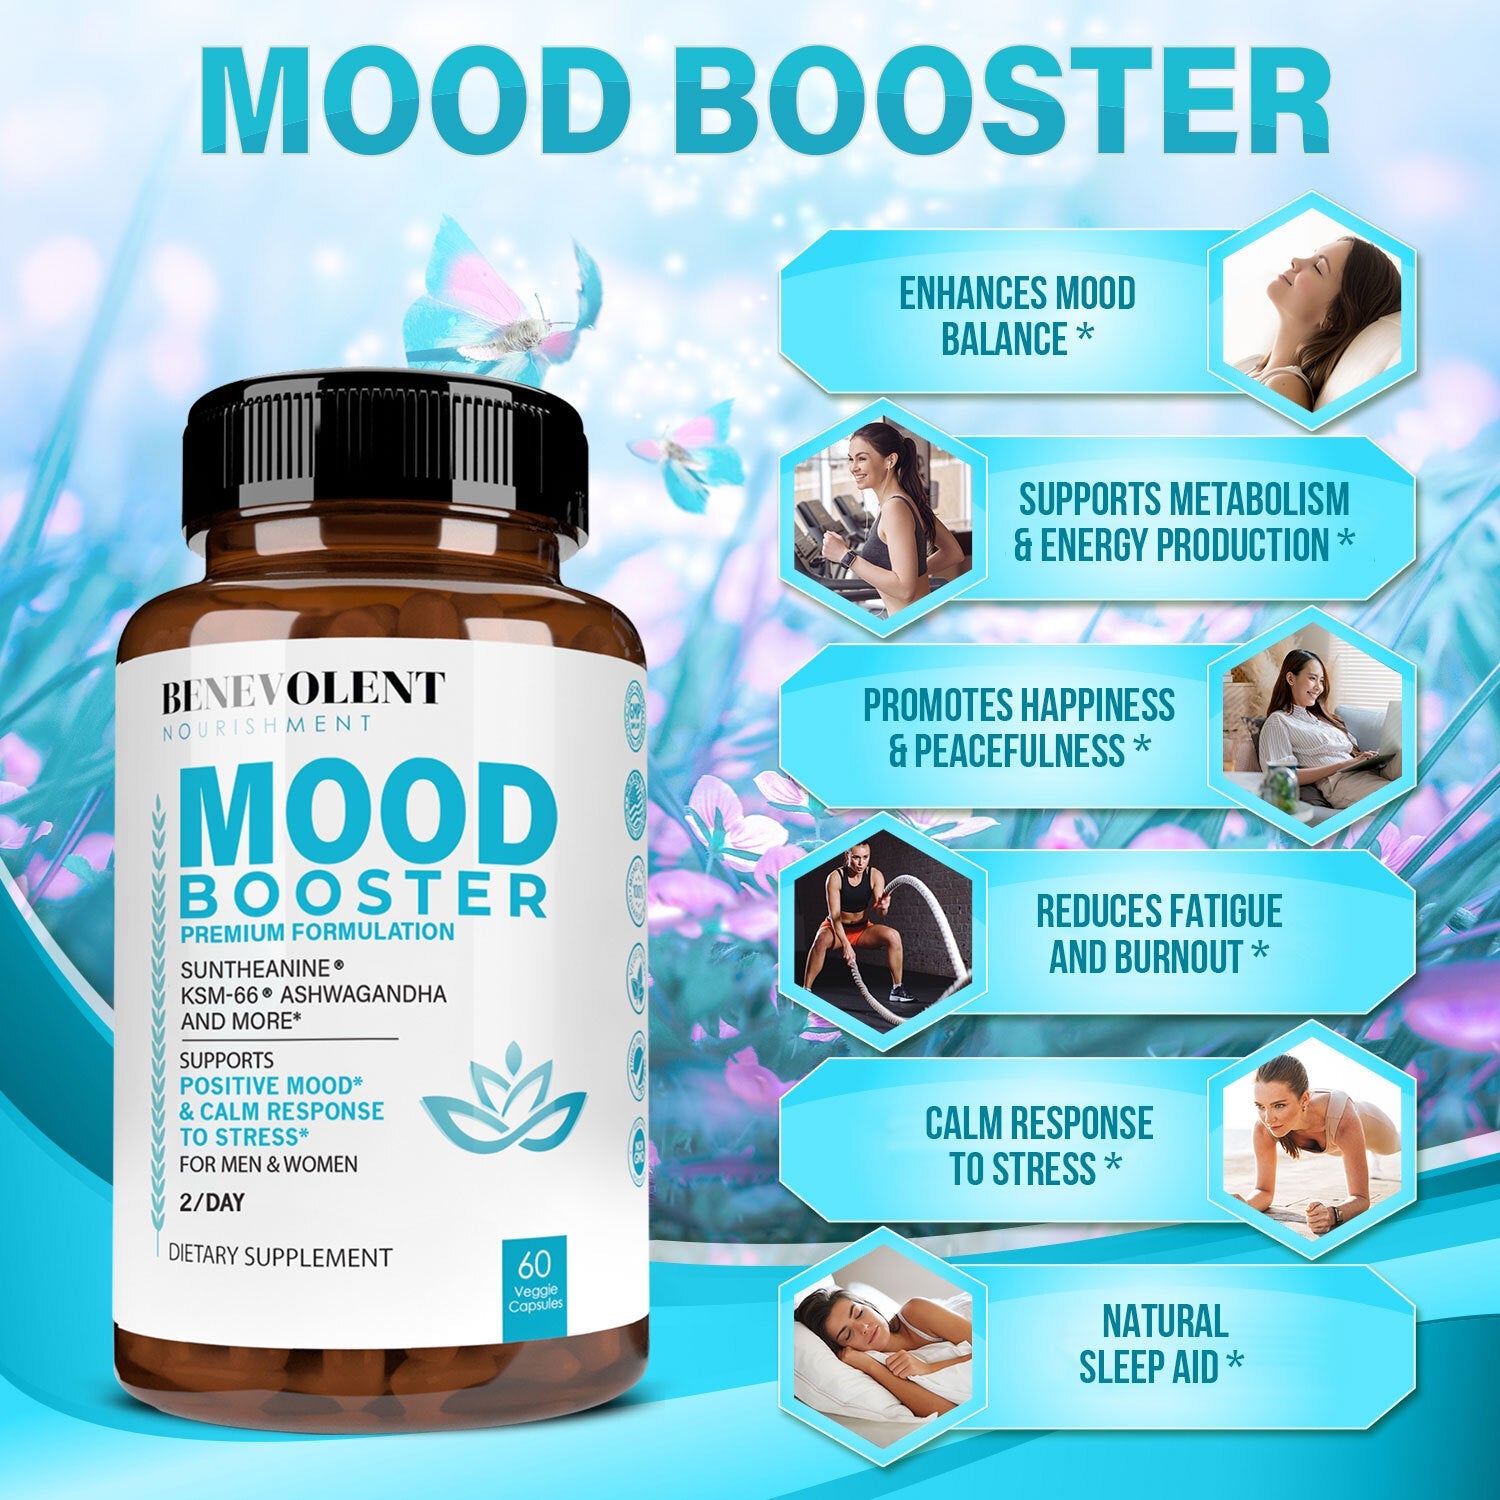 Mood Booster benefits